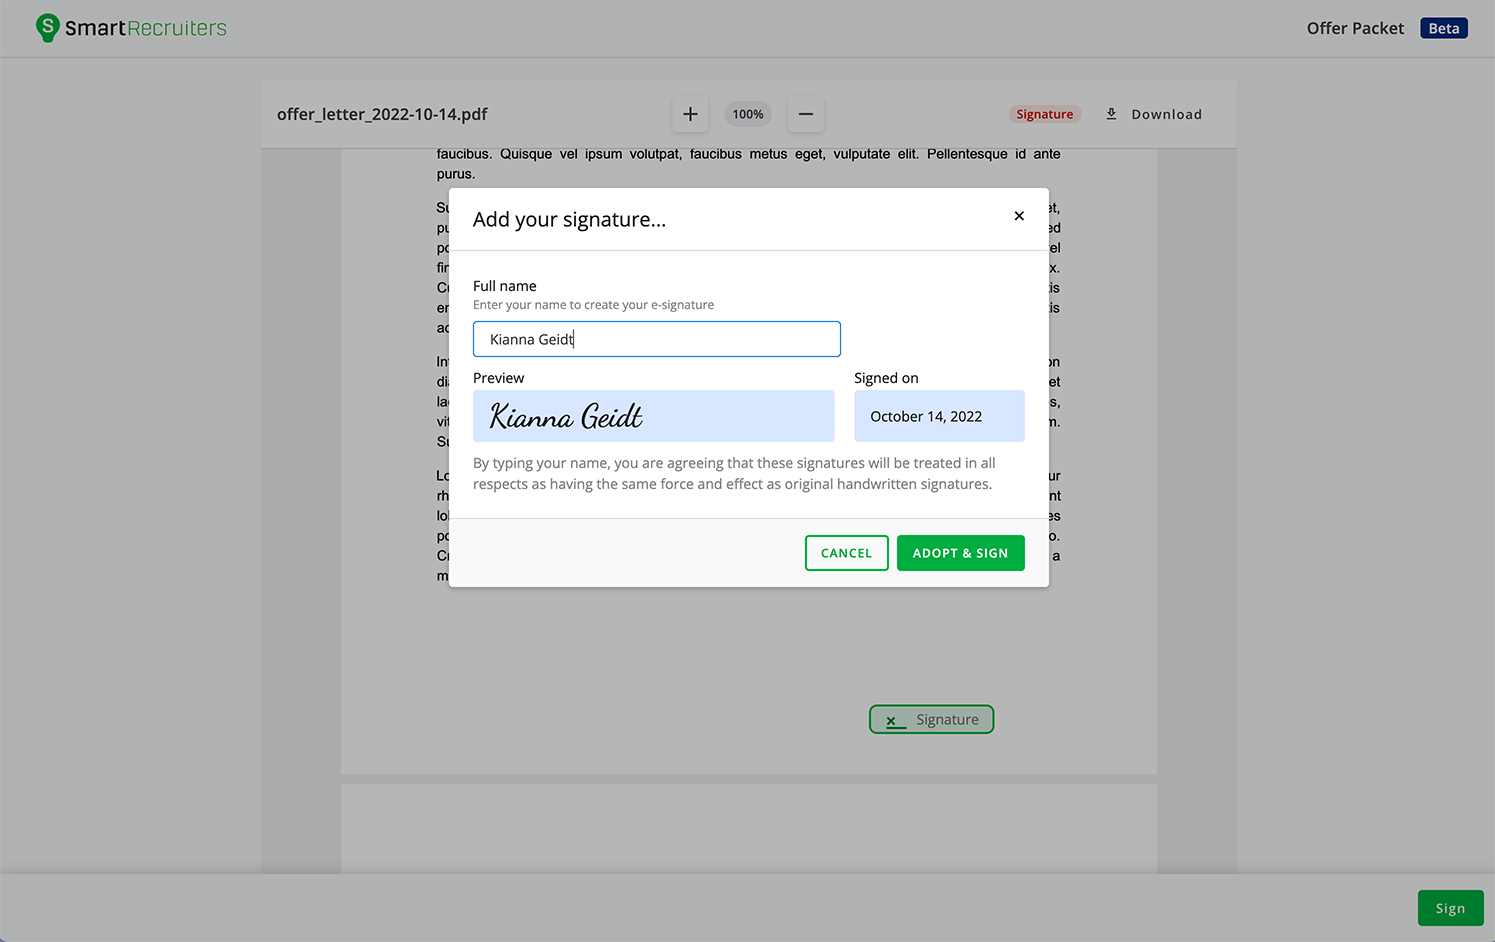 Optimize your offer process with new docusign integration